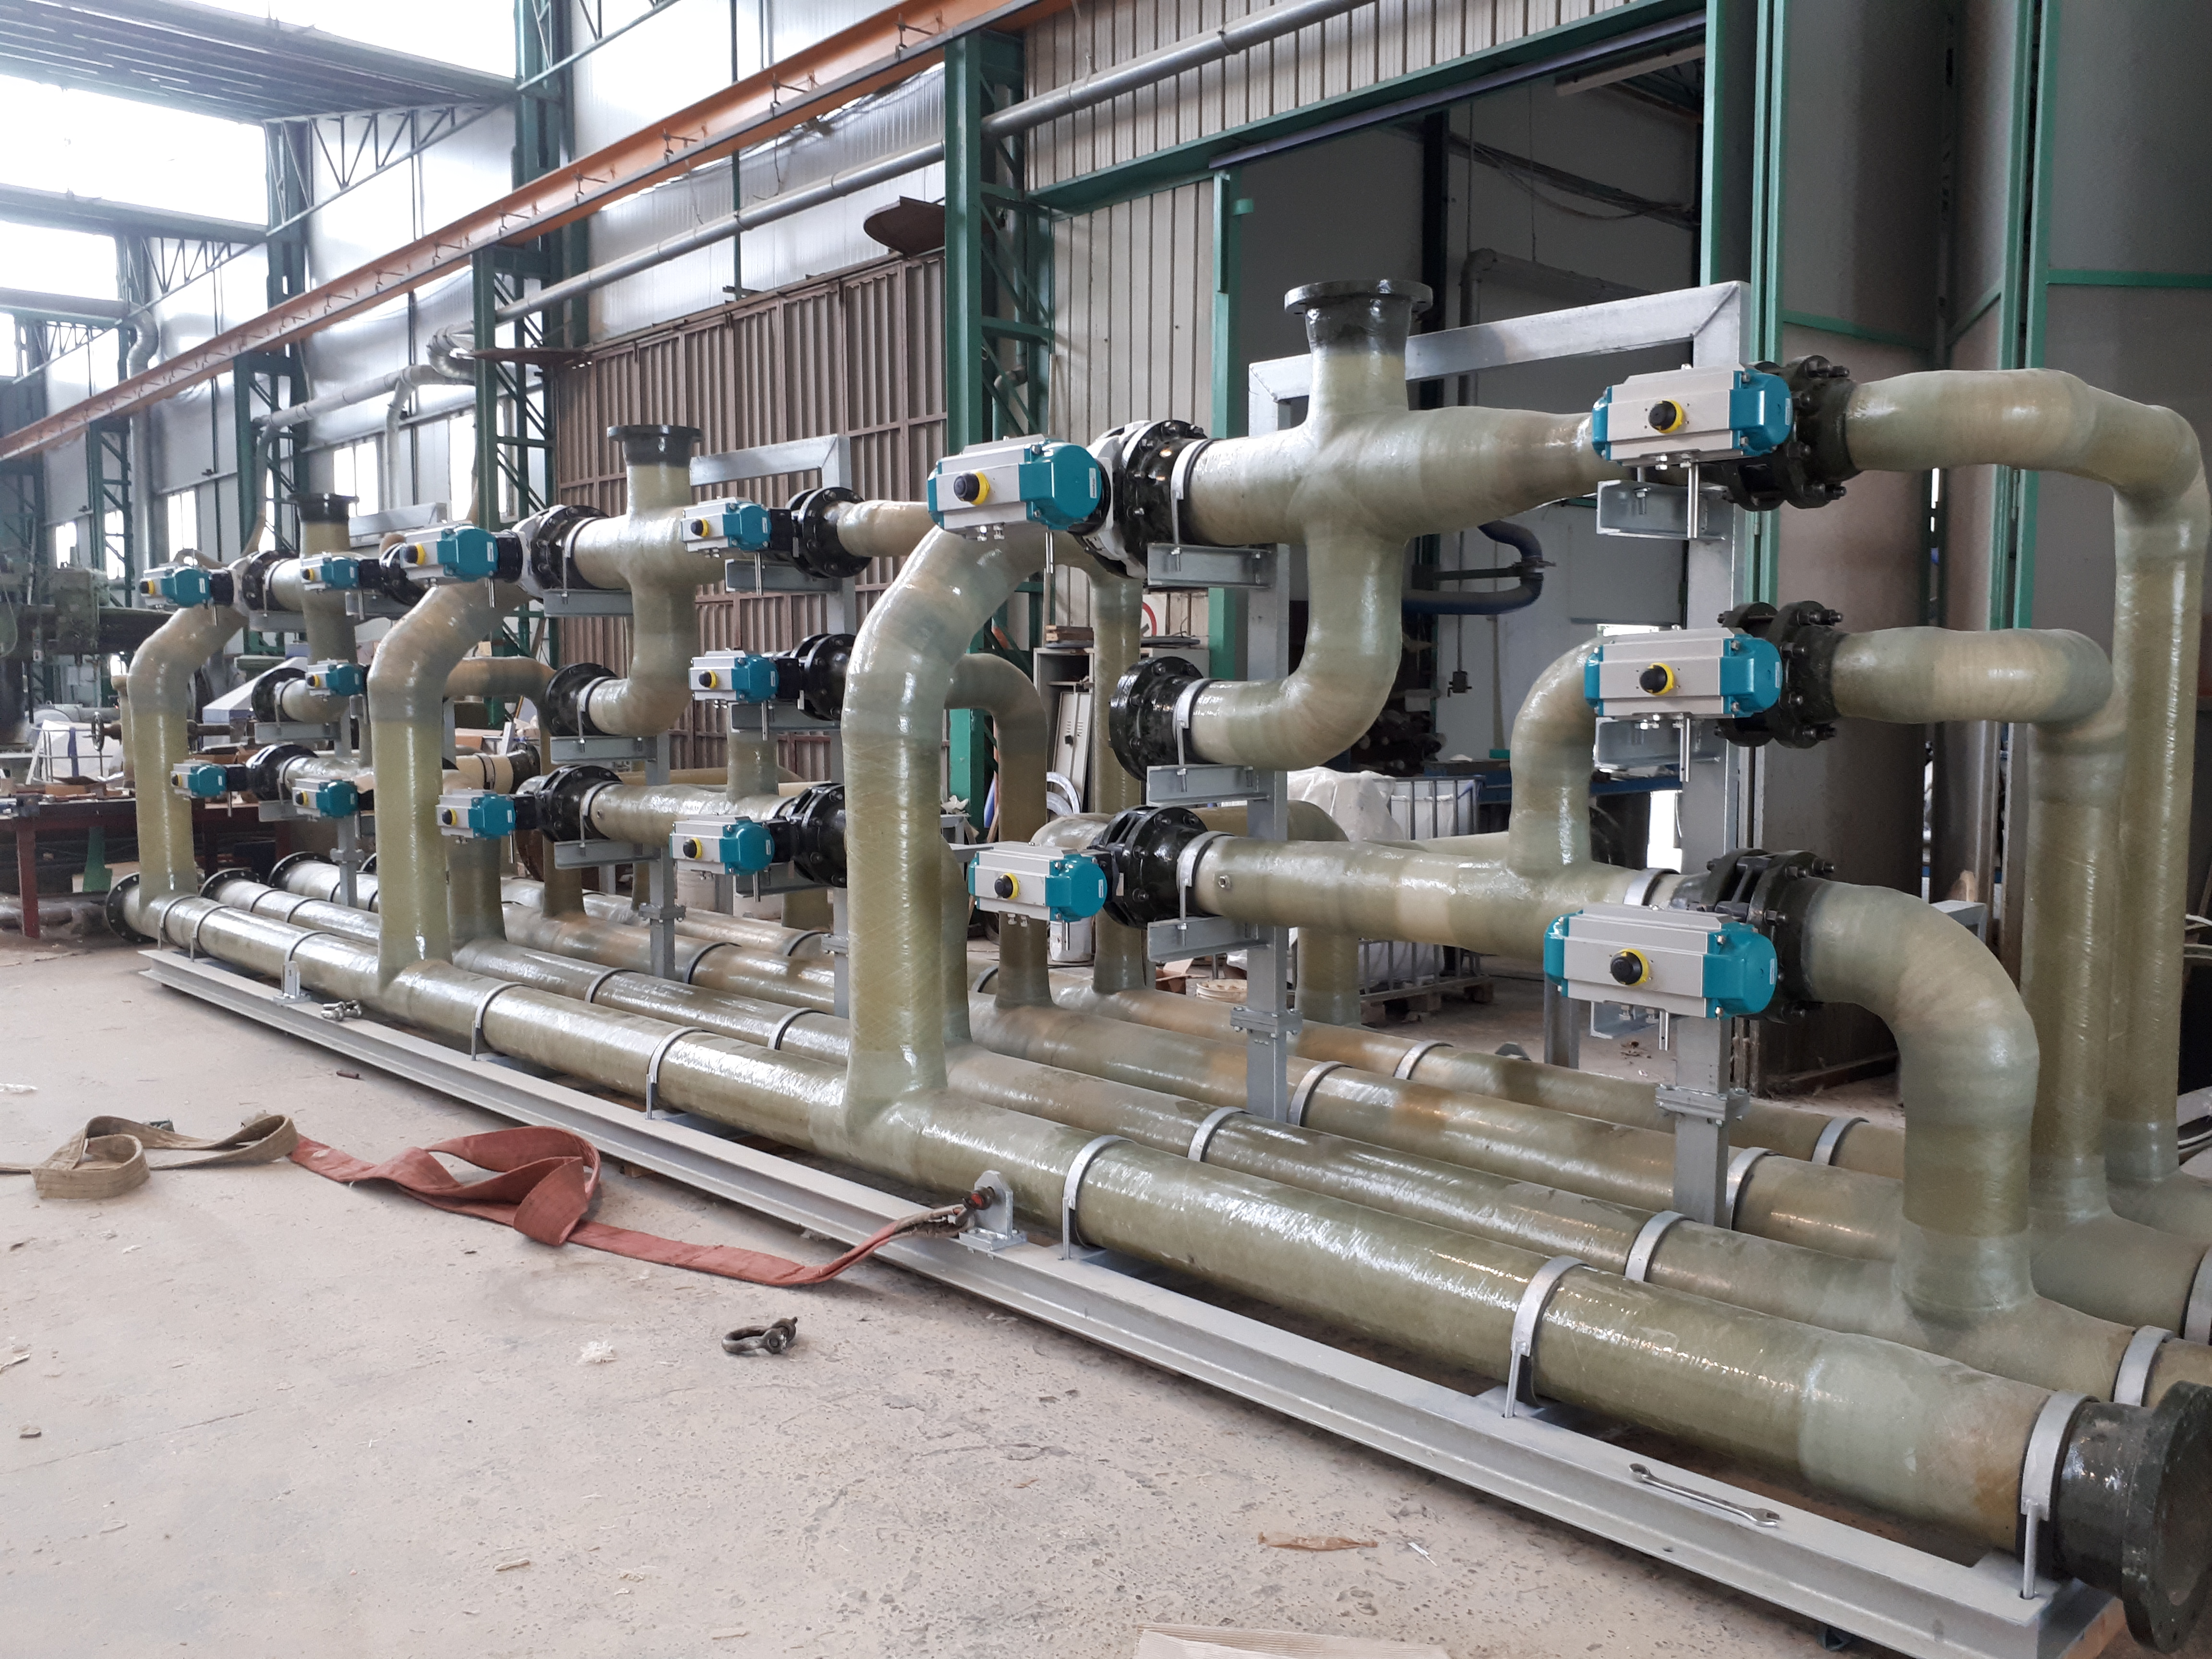 GRP piping on skid for Filters Control Group – 2018